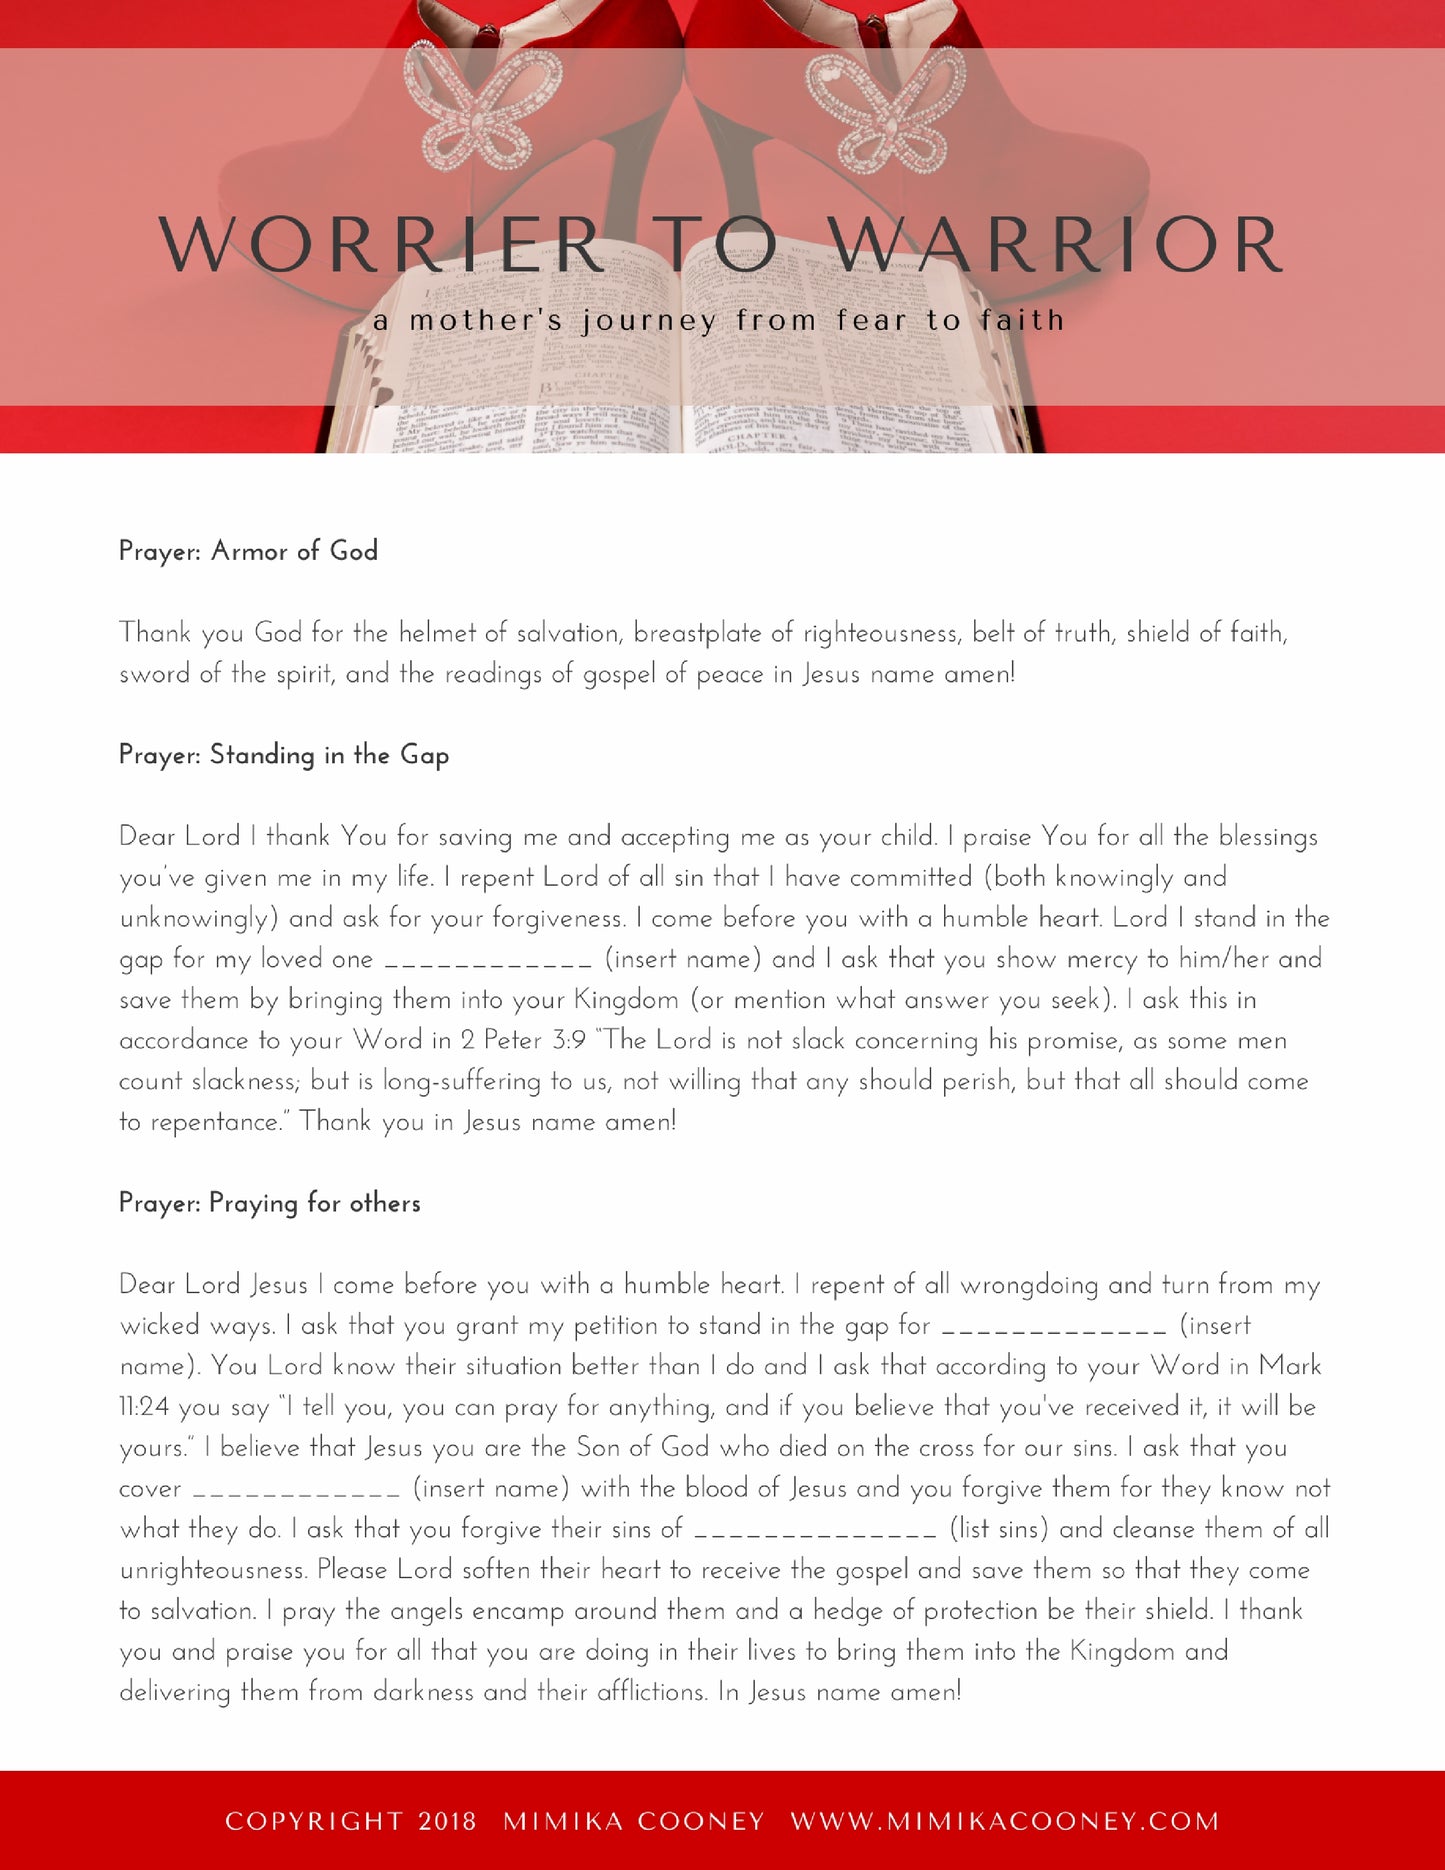 Worrier to Warrior: A Mother's Journey from Fear to Faith (EBOOK)